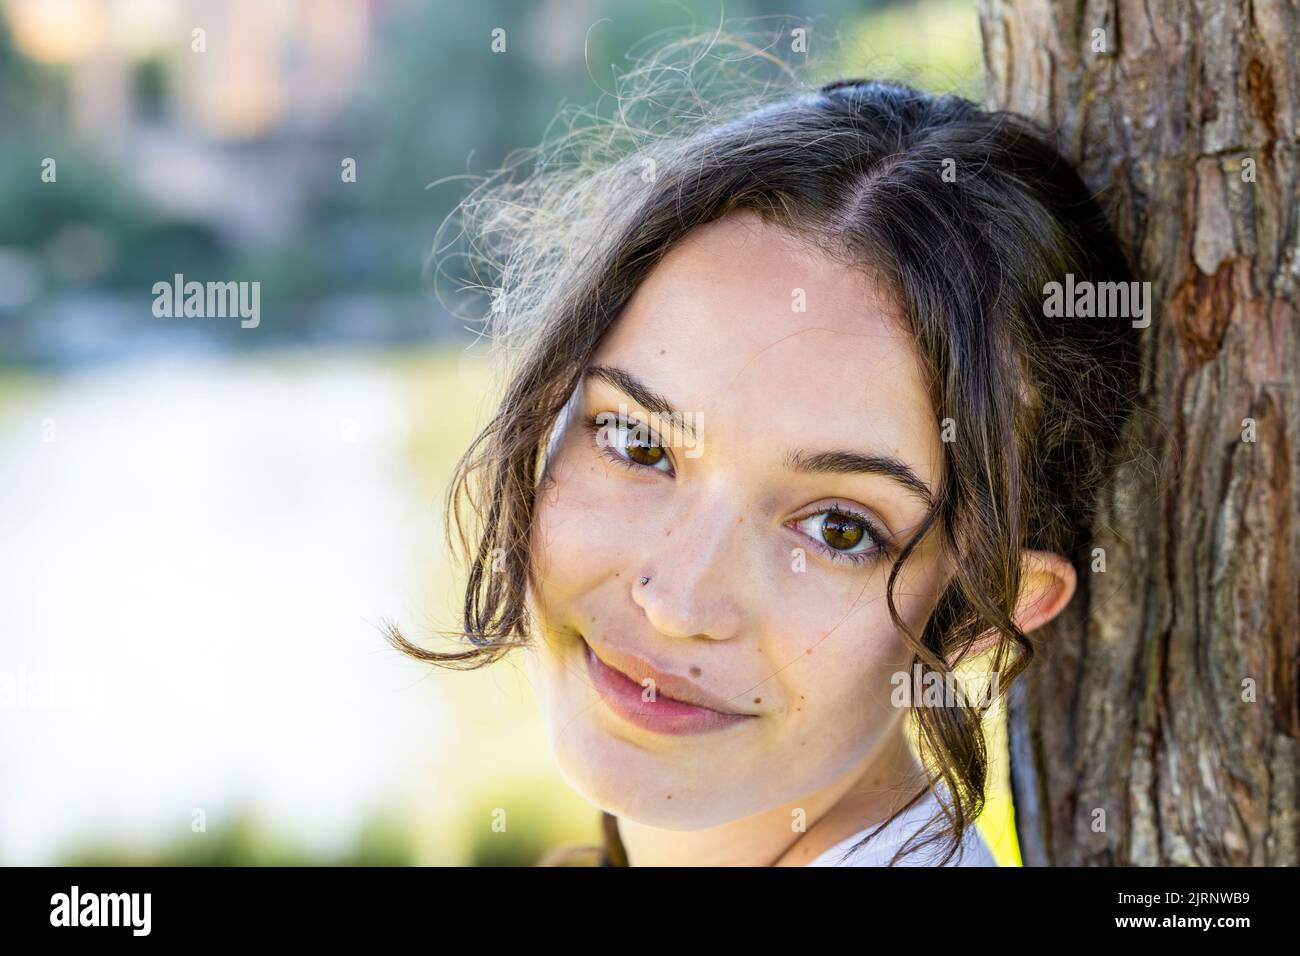 Close Up Portrait of a Young Woman Leaning on Tree with the Palace of Fine Arts in the Background Stock Photo